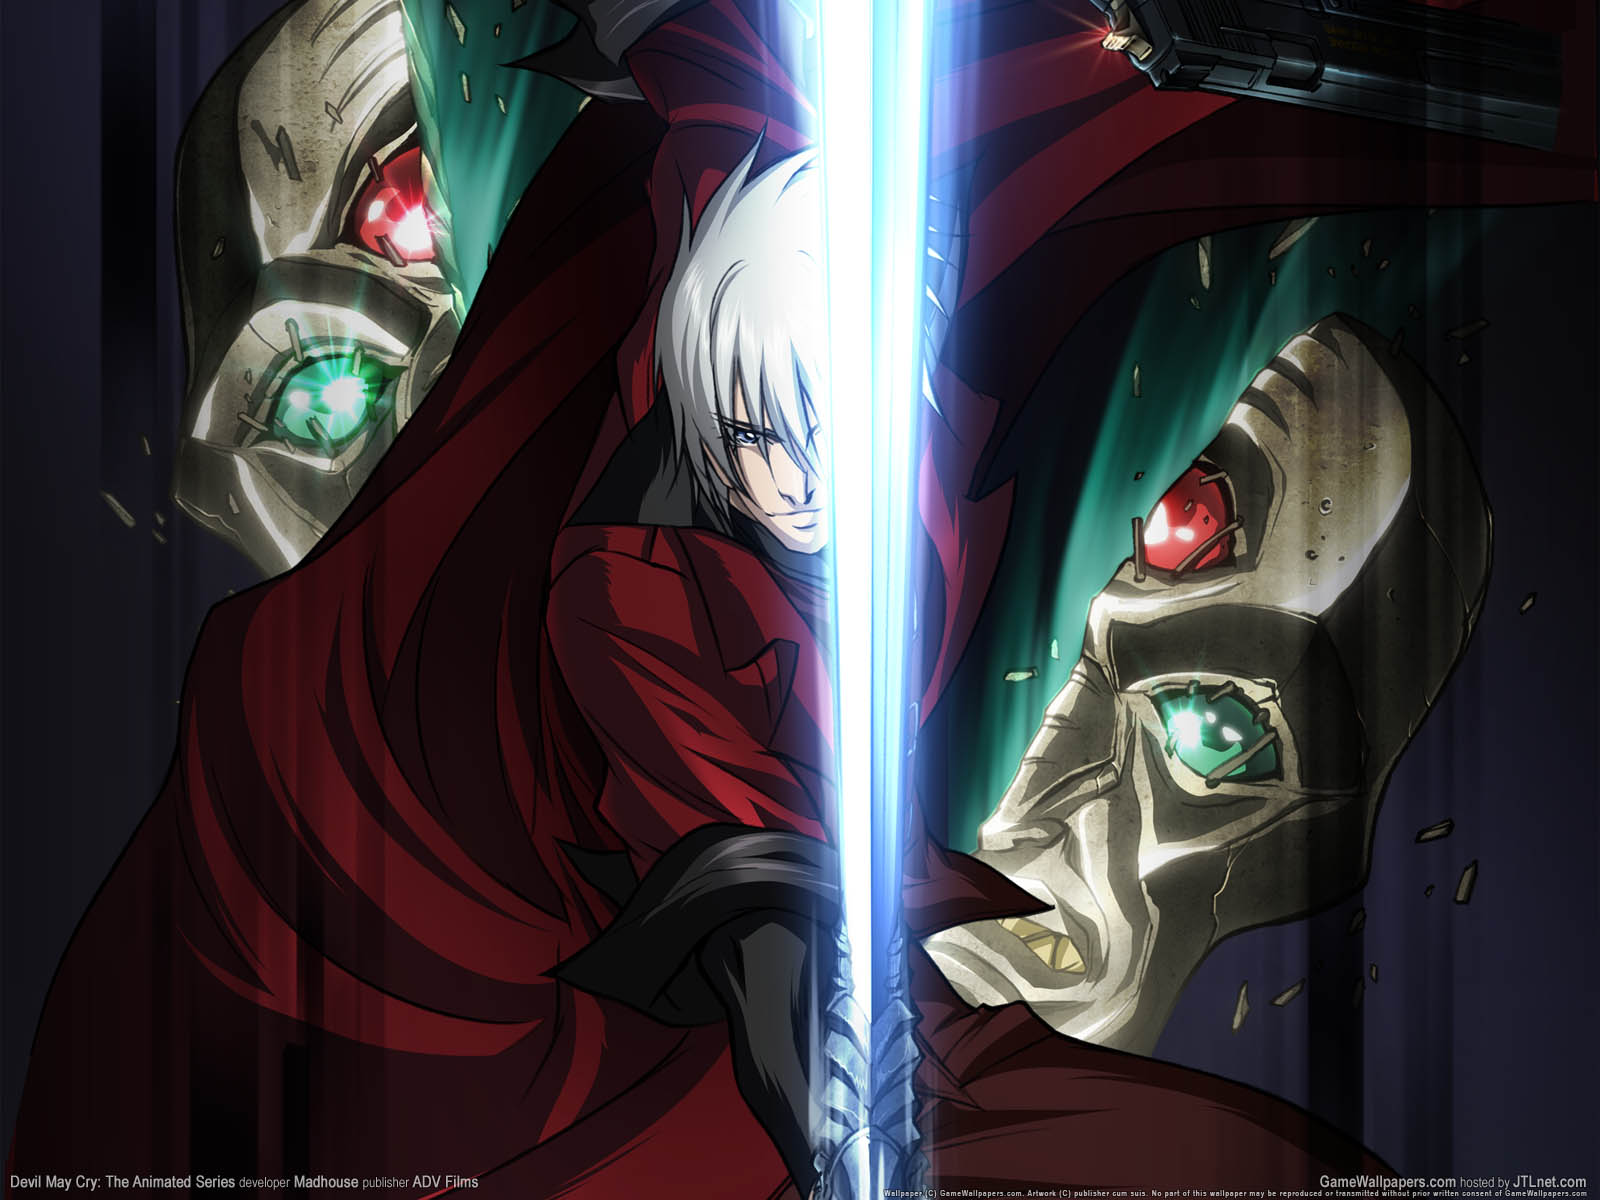 Devil May Cry%3A The Animated Series fond d'cran 01 1600x1200